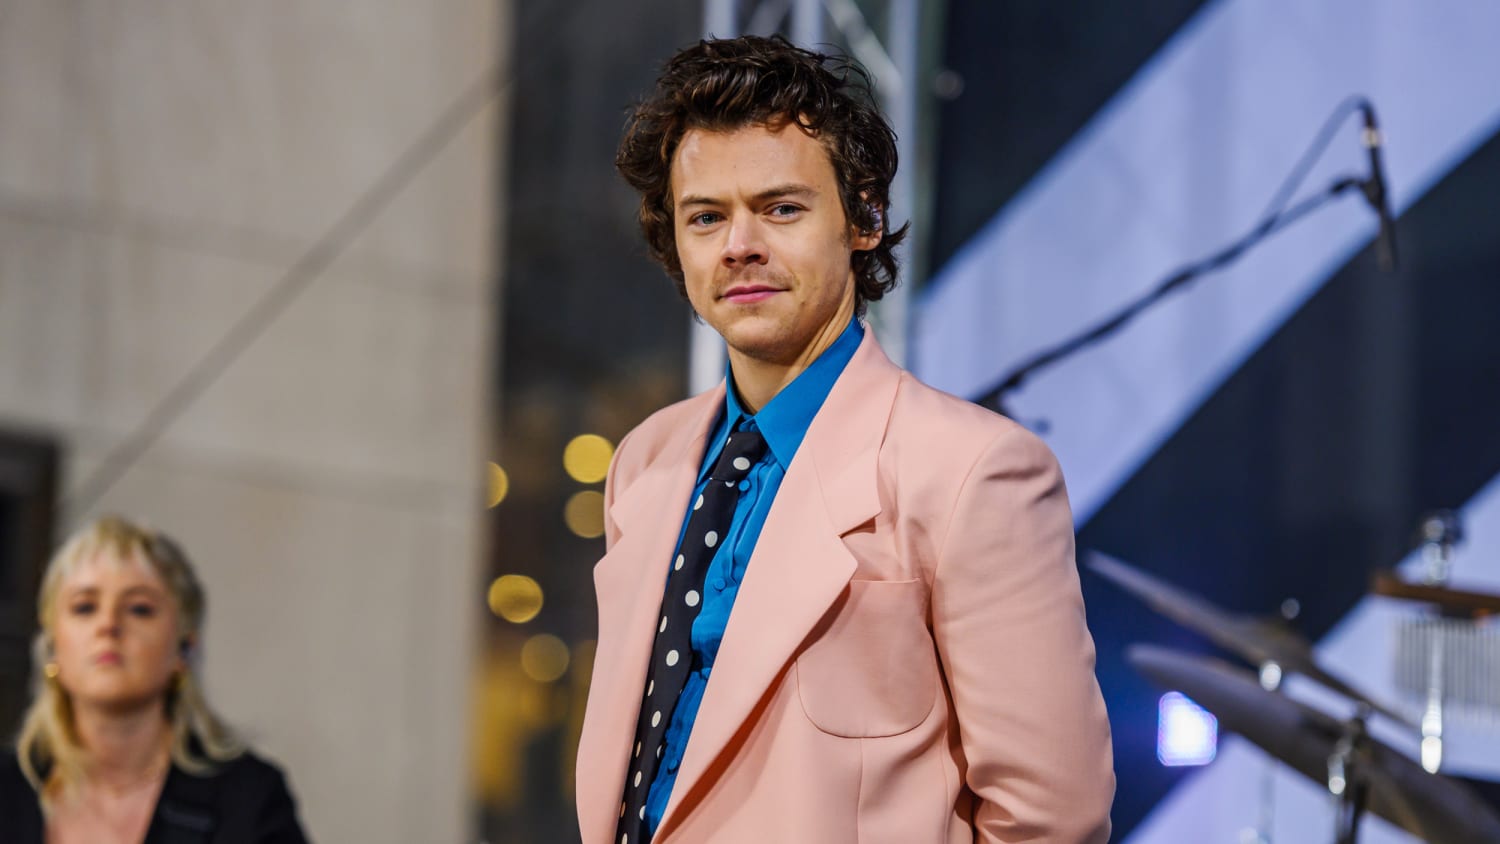 Two brave men recreate Harry Styles' controversial Vogue shoot by